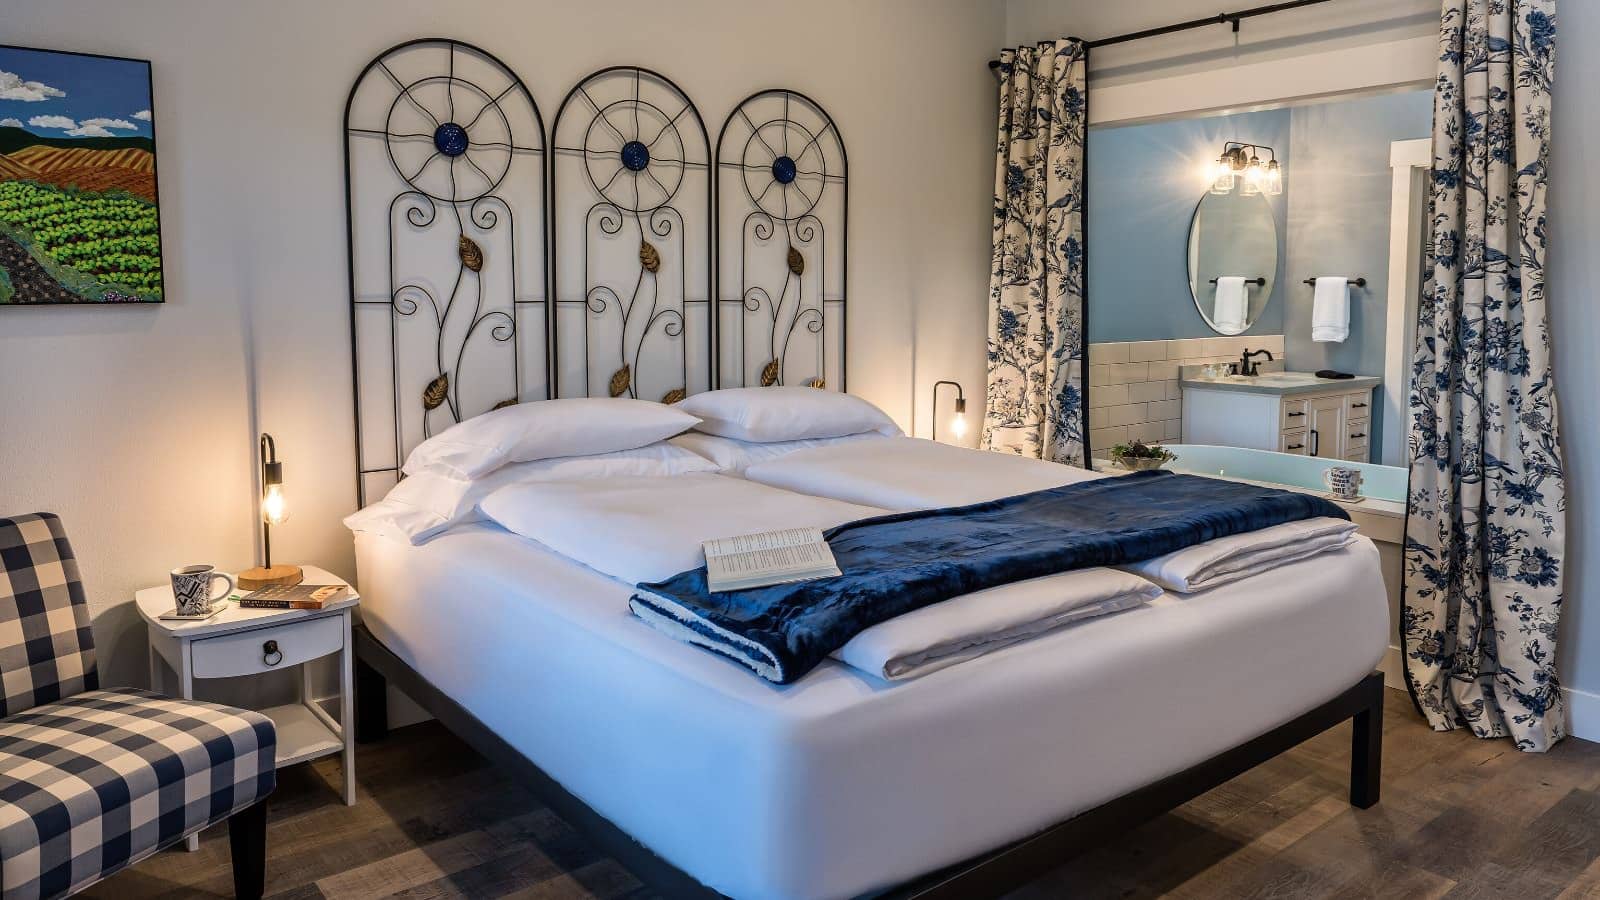 Bedroom with light colored walls, hardwood flooring, custom metal headboard, white bedding, navy and white checked upholstered chair, and view into the bathroom